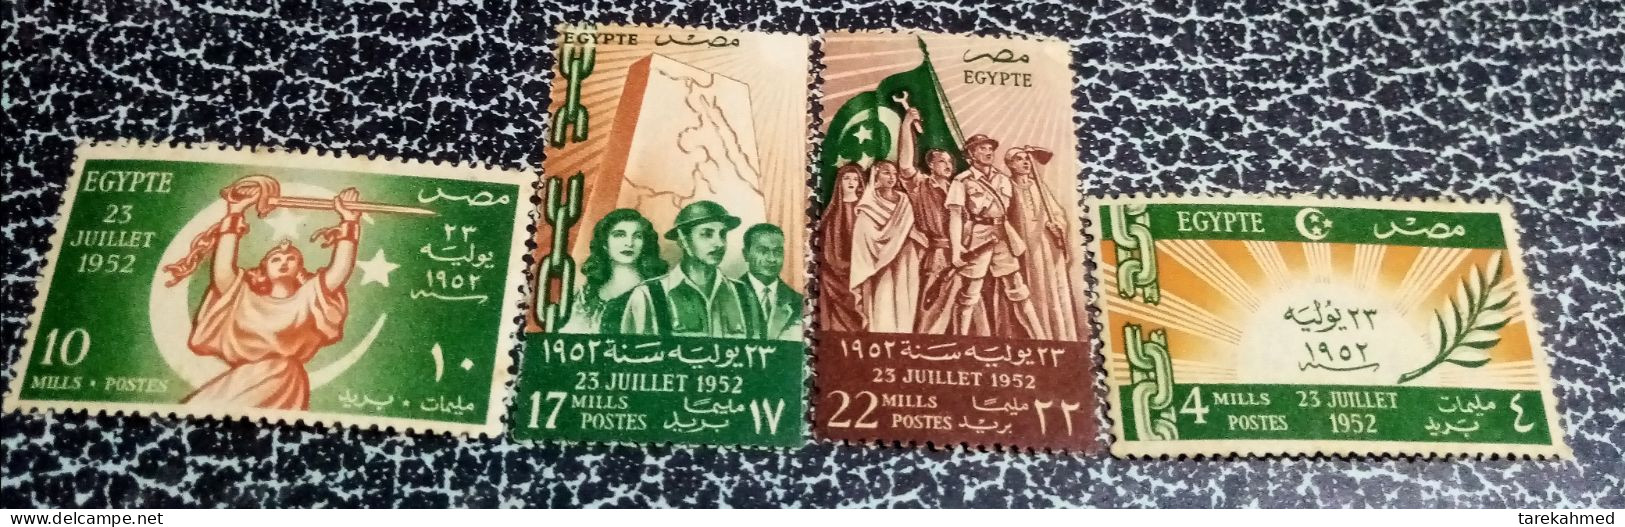 Egypt 1952 - Complete Set Of The Change Of Government, July 23 Revolution , 1952 )  - MNH - Ungebraucht